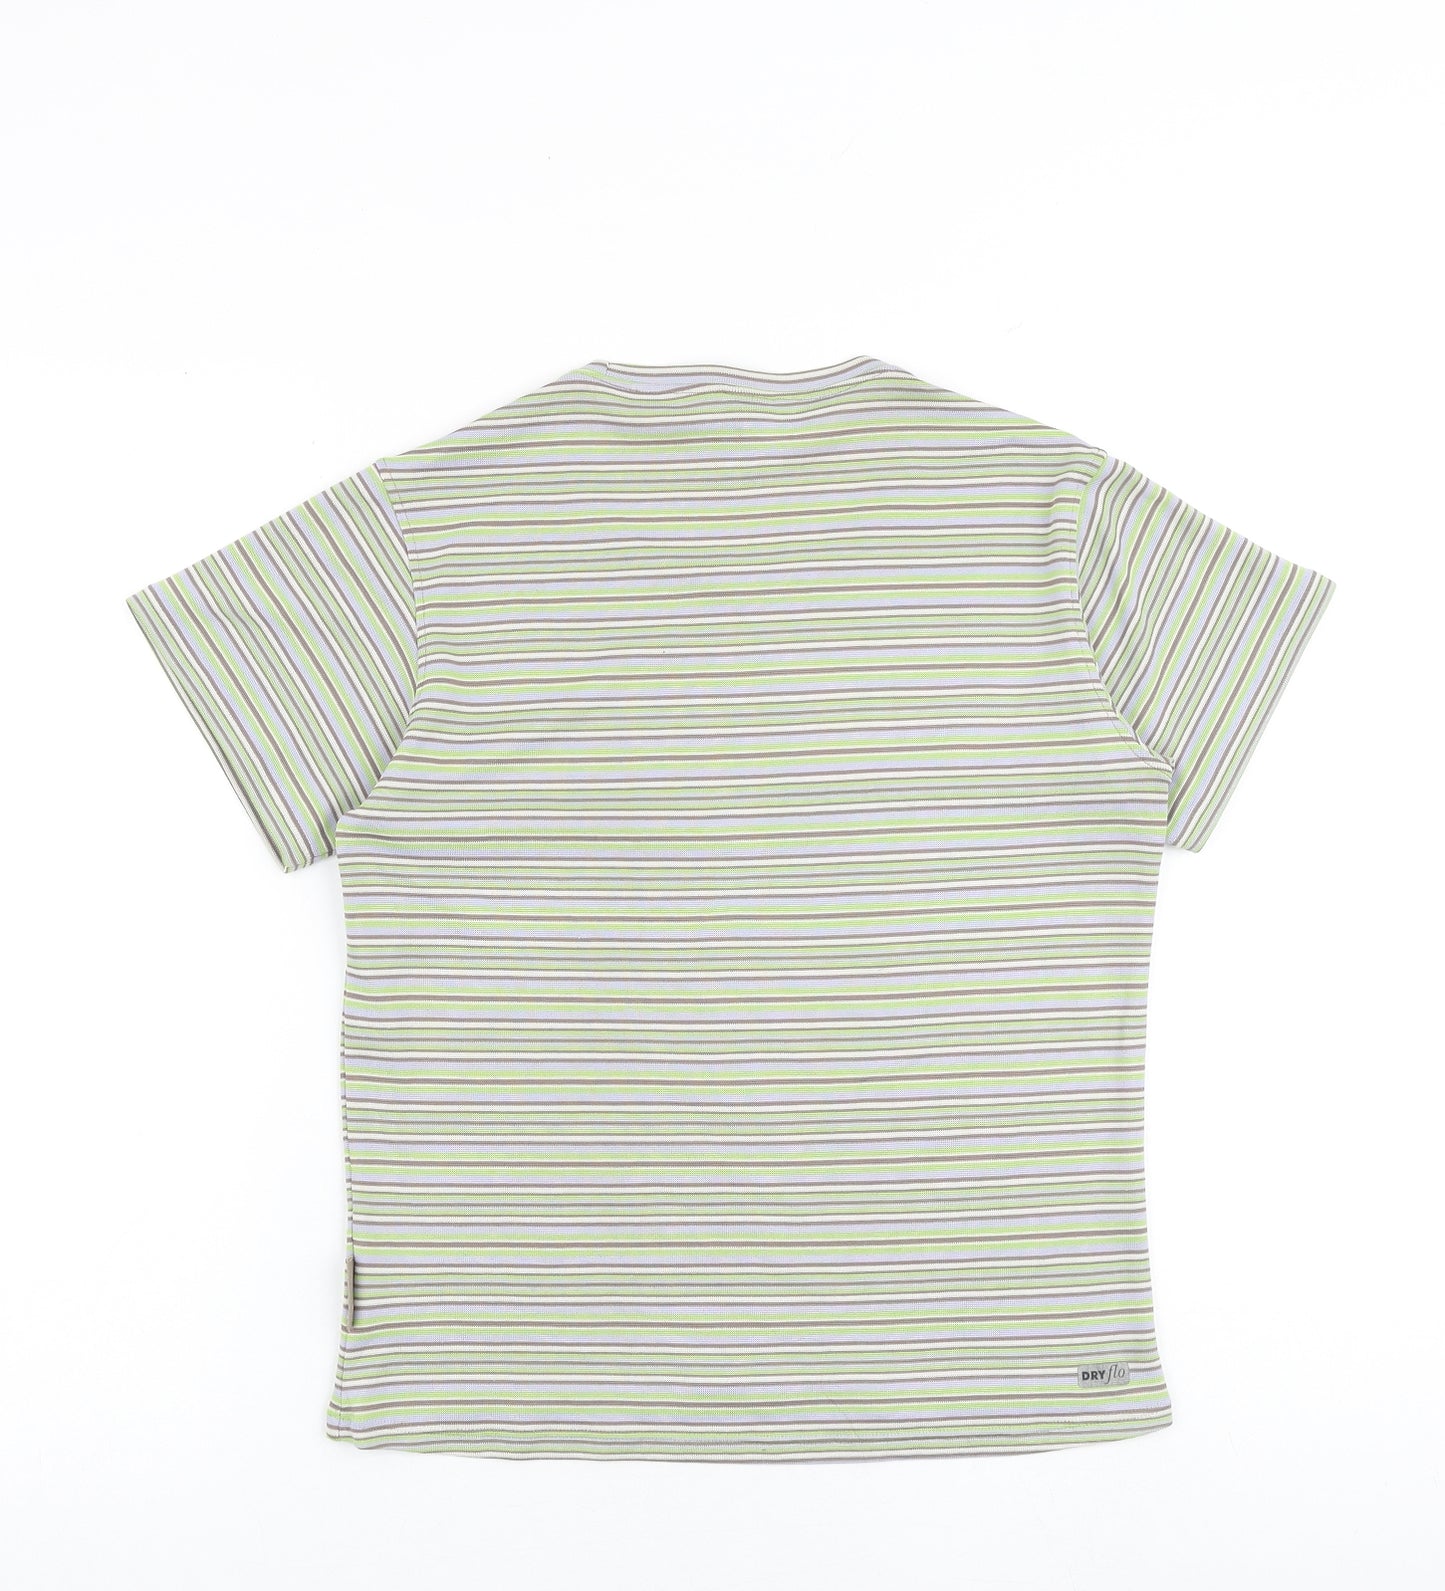 Lowe Alpine Womens Multicoloured Striped Polyester Basic T-Shirt Size S Crew Neck